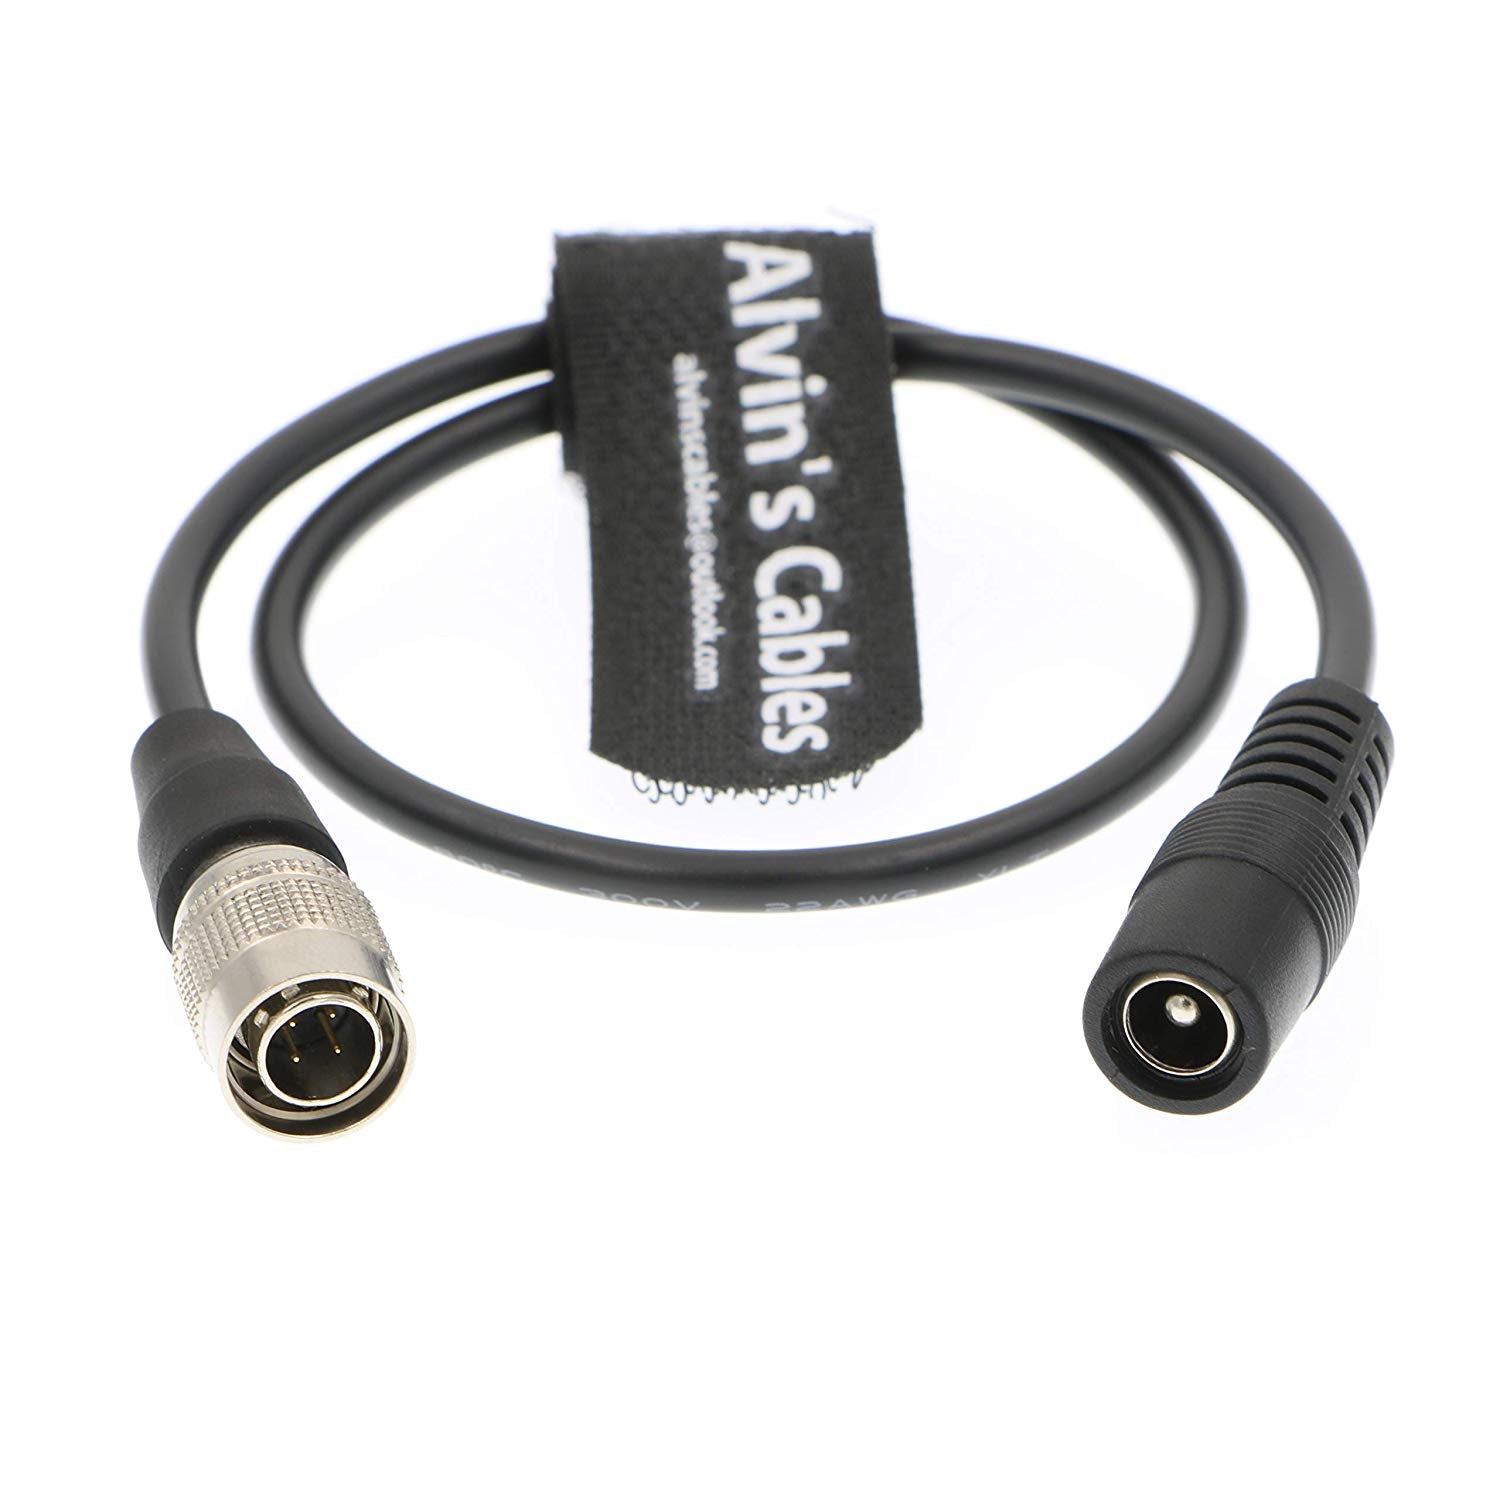 Alvin's Cables Hirose 4 Pin Male to DC Female Cable for Sound Device ZAXCOM Blackmagic